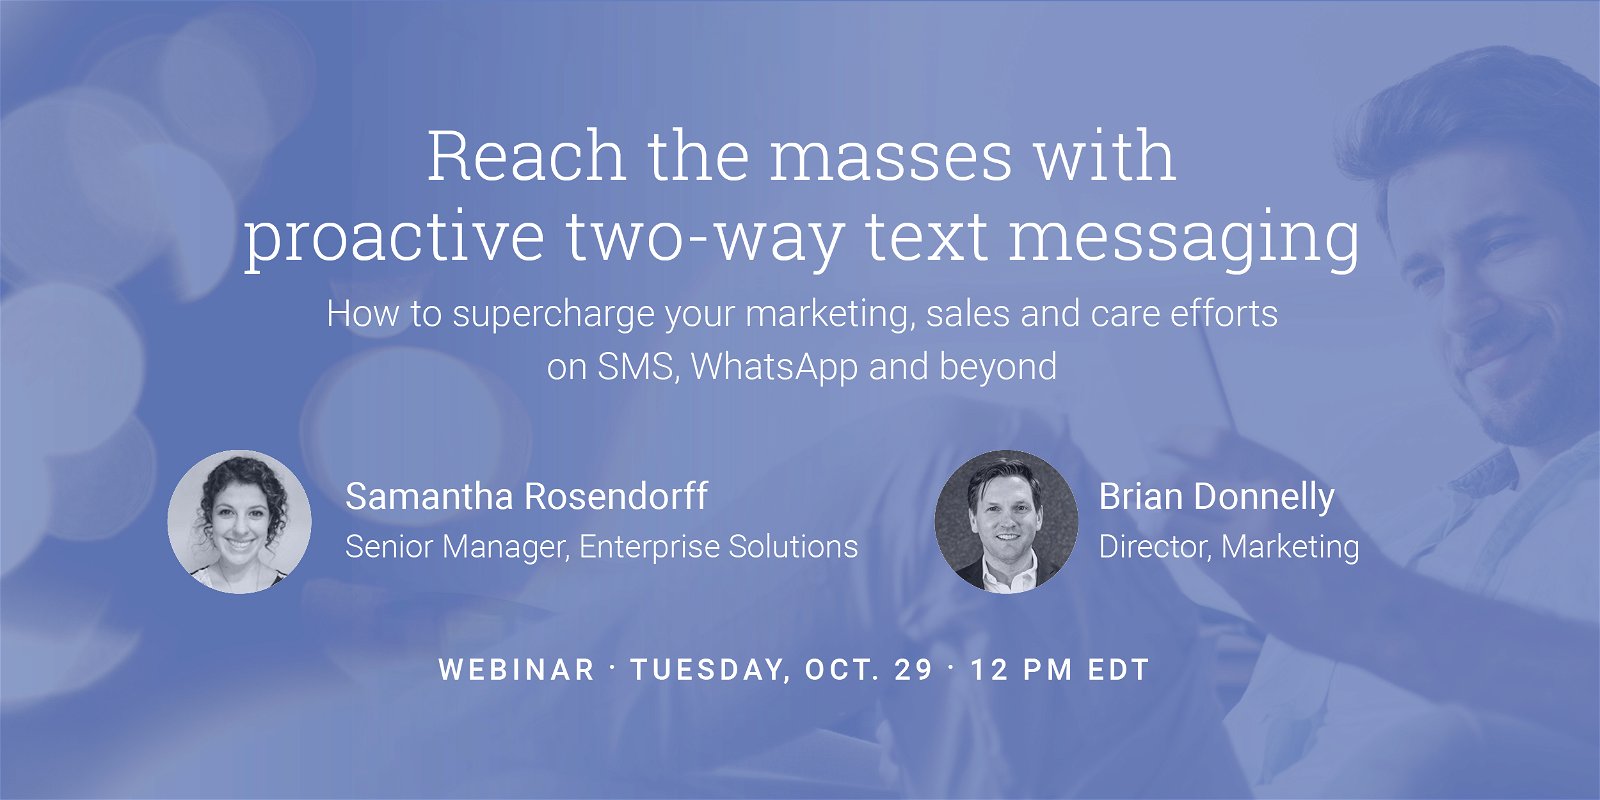 [REGISTER] Reach the masses with proactive two-way text messaging